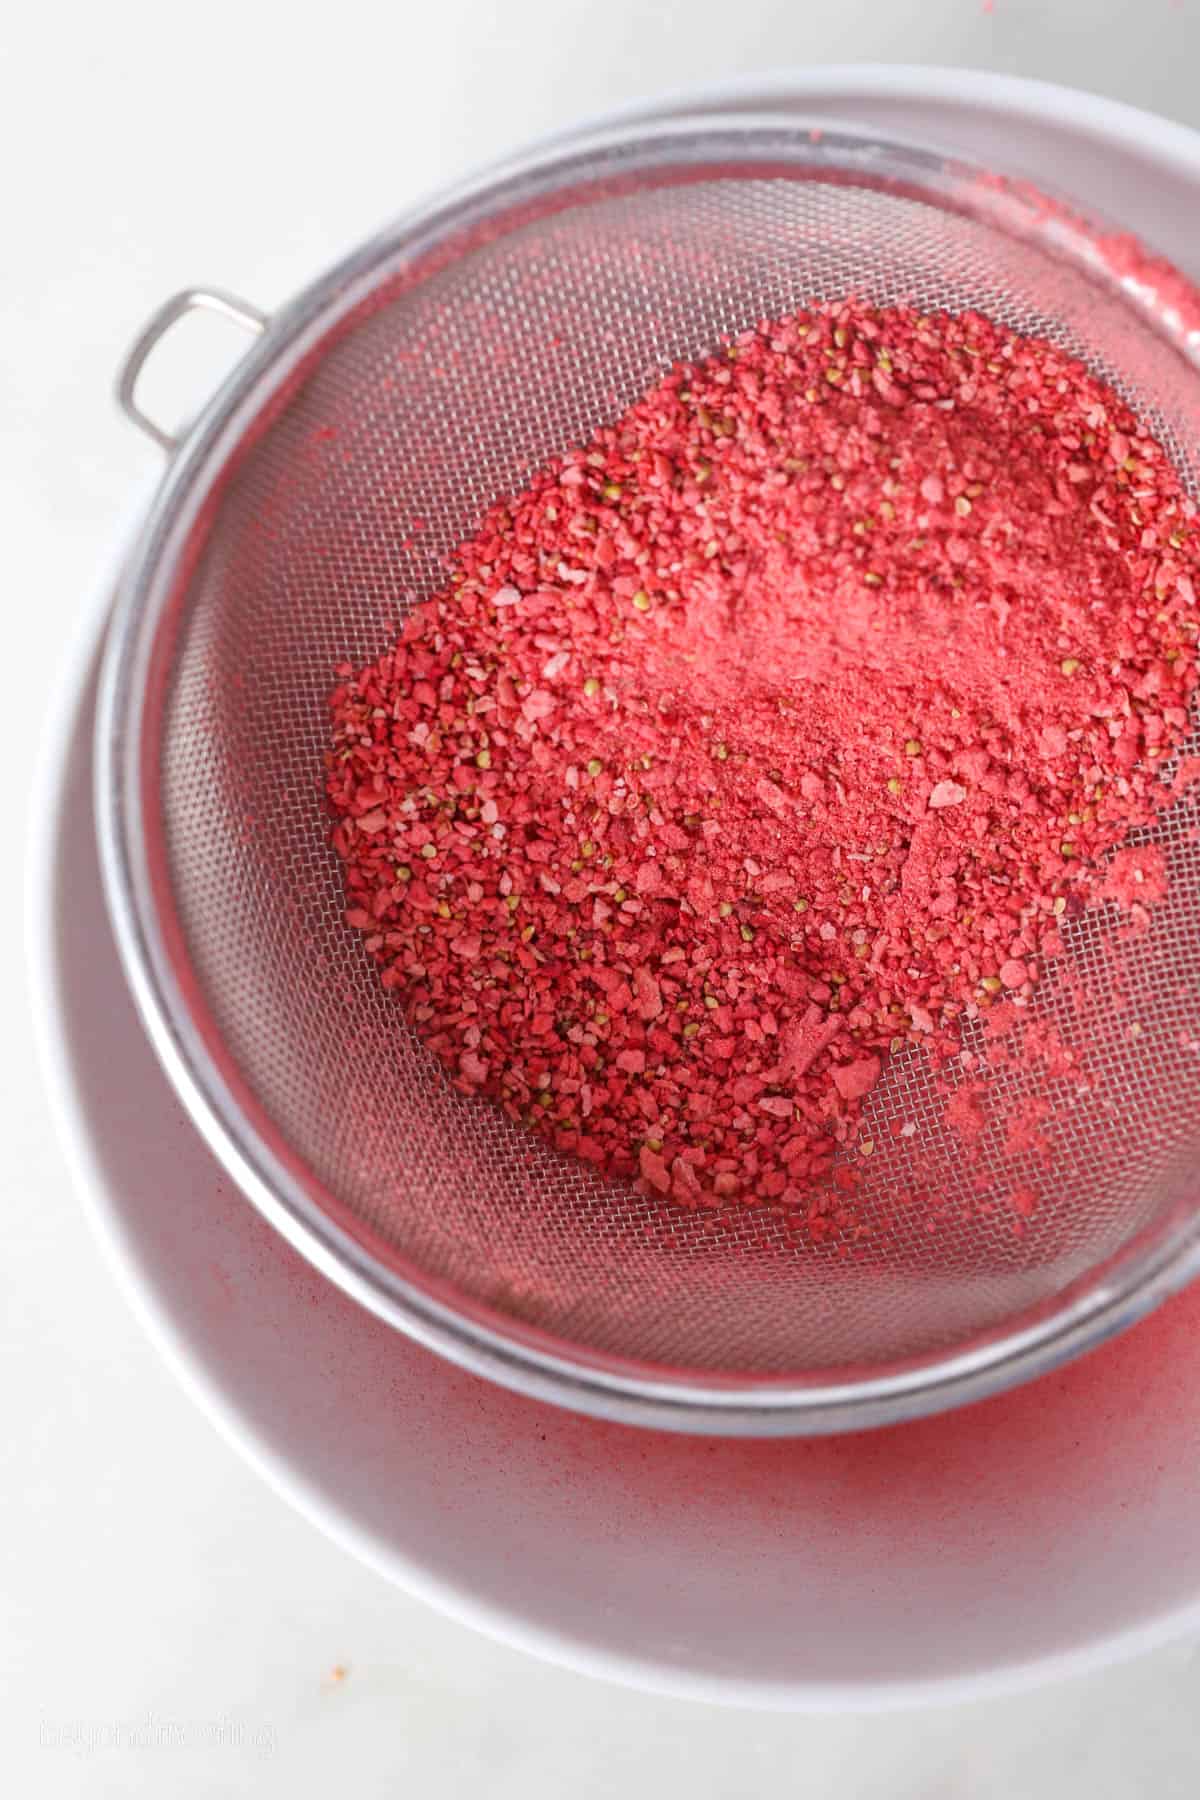 A mesh sieve with powdered freeze-dried strawberries